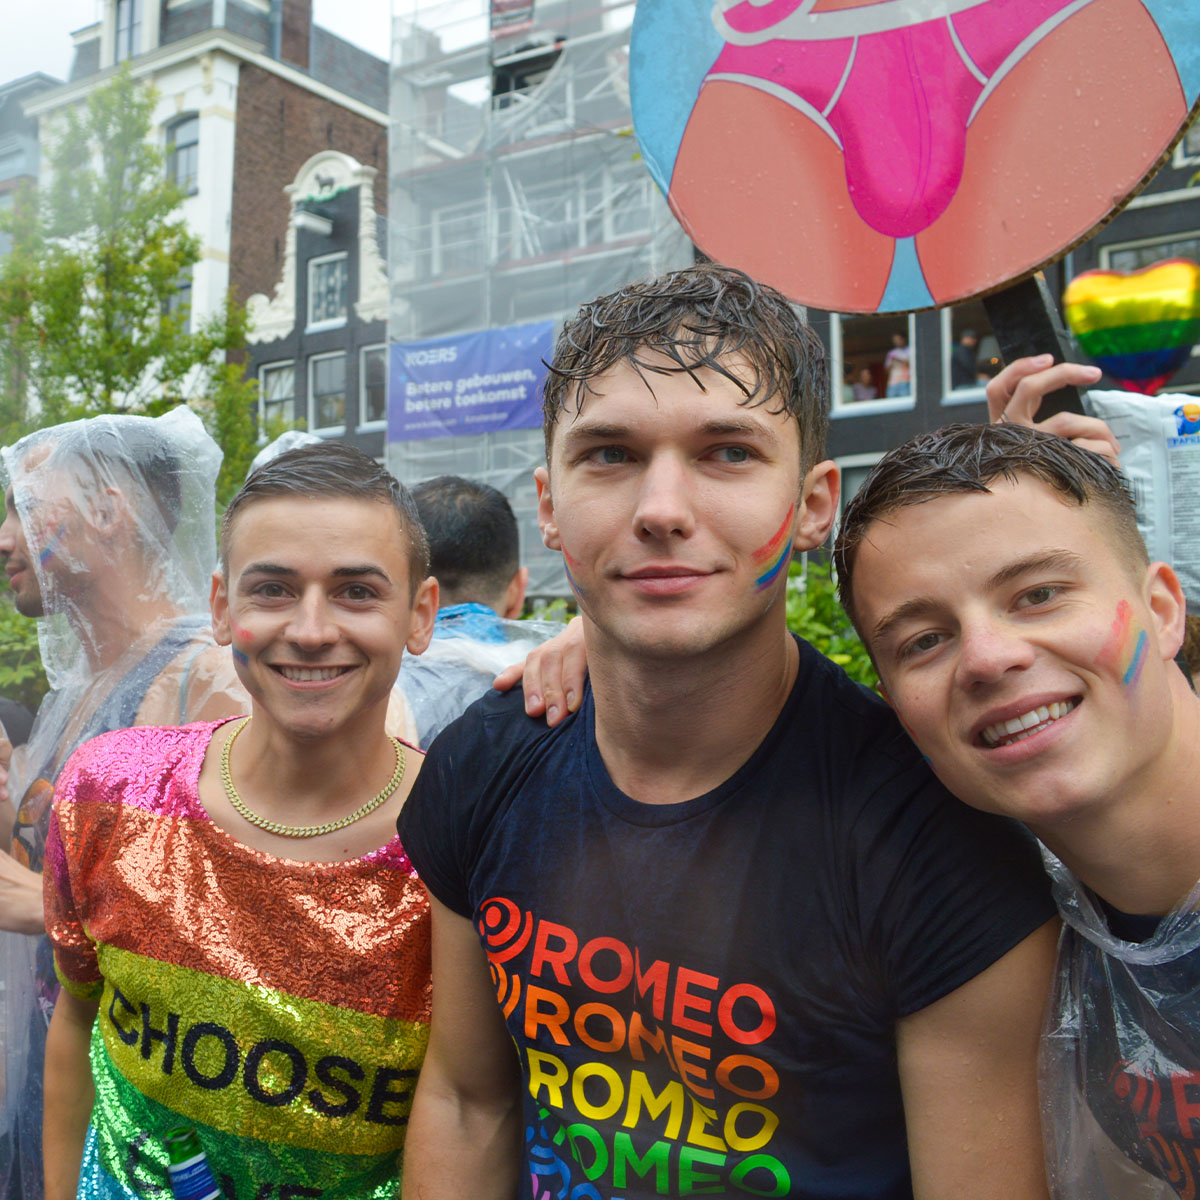 'Are you gay?'

You might have seen Instagram reels by Art Bezrukavenko posing this question to people on the street. He and his friends Stan & Michael were on our boat during Amsterdam Pride. Do you follow them? Which one is your favourite?

#ROMEO #RomeoLove #RomeoPride